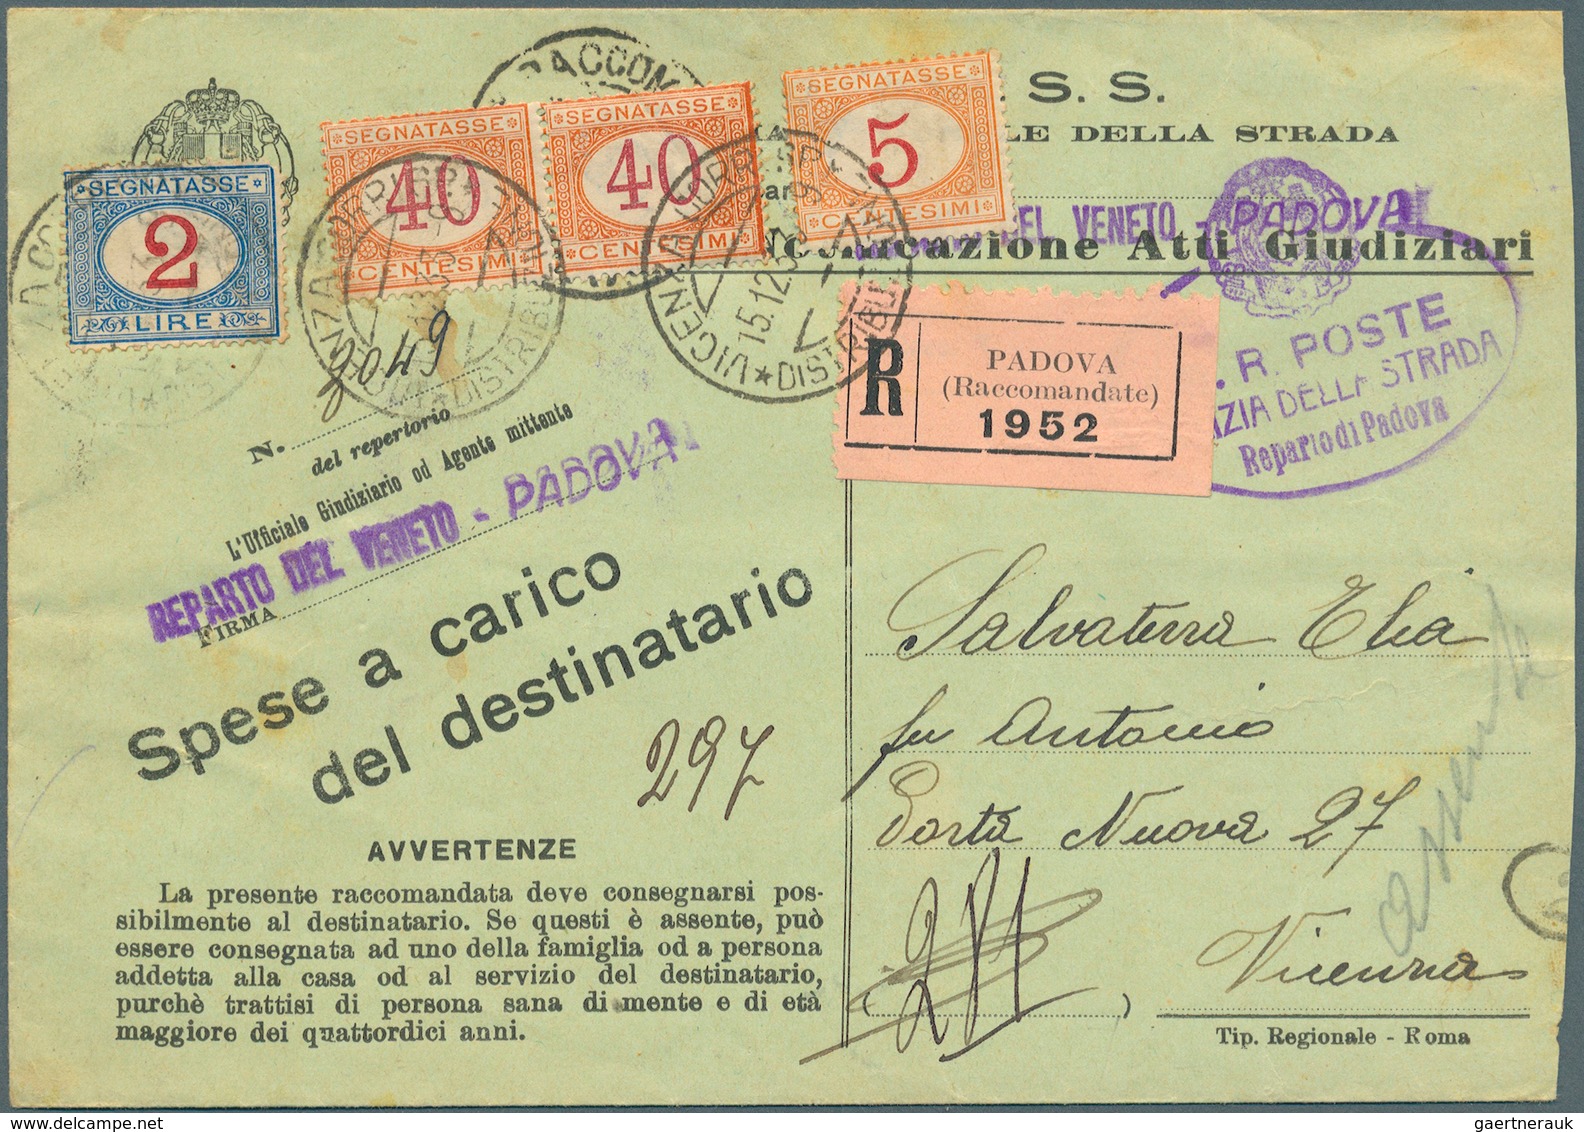 Italien - Portomarken: 1883/1970 (ca) 80+ covers with porto stamps - a huge part of them "used as re